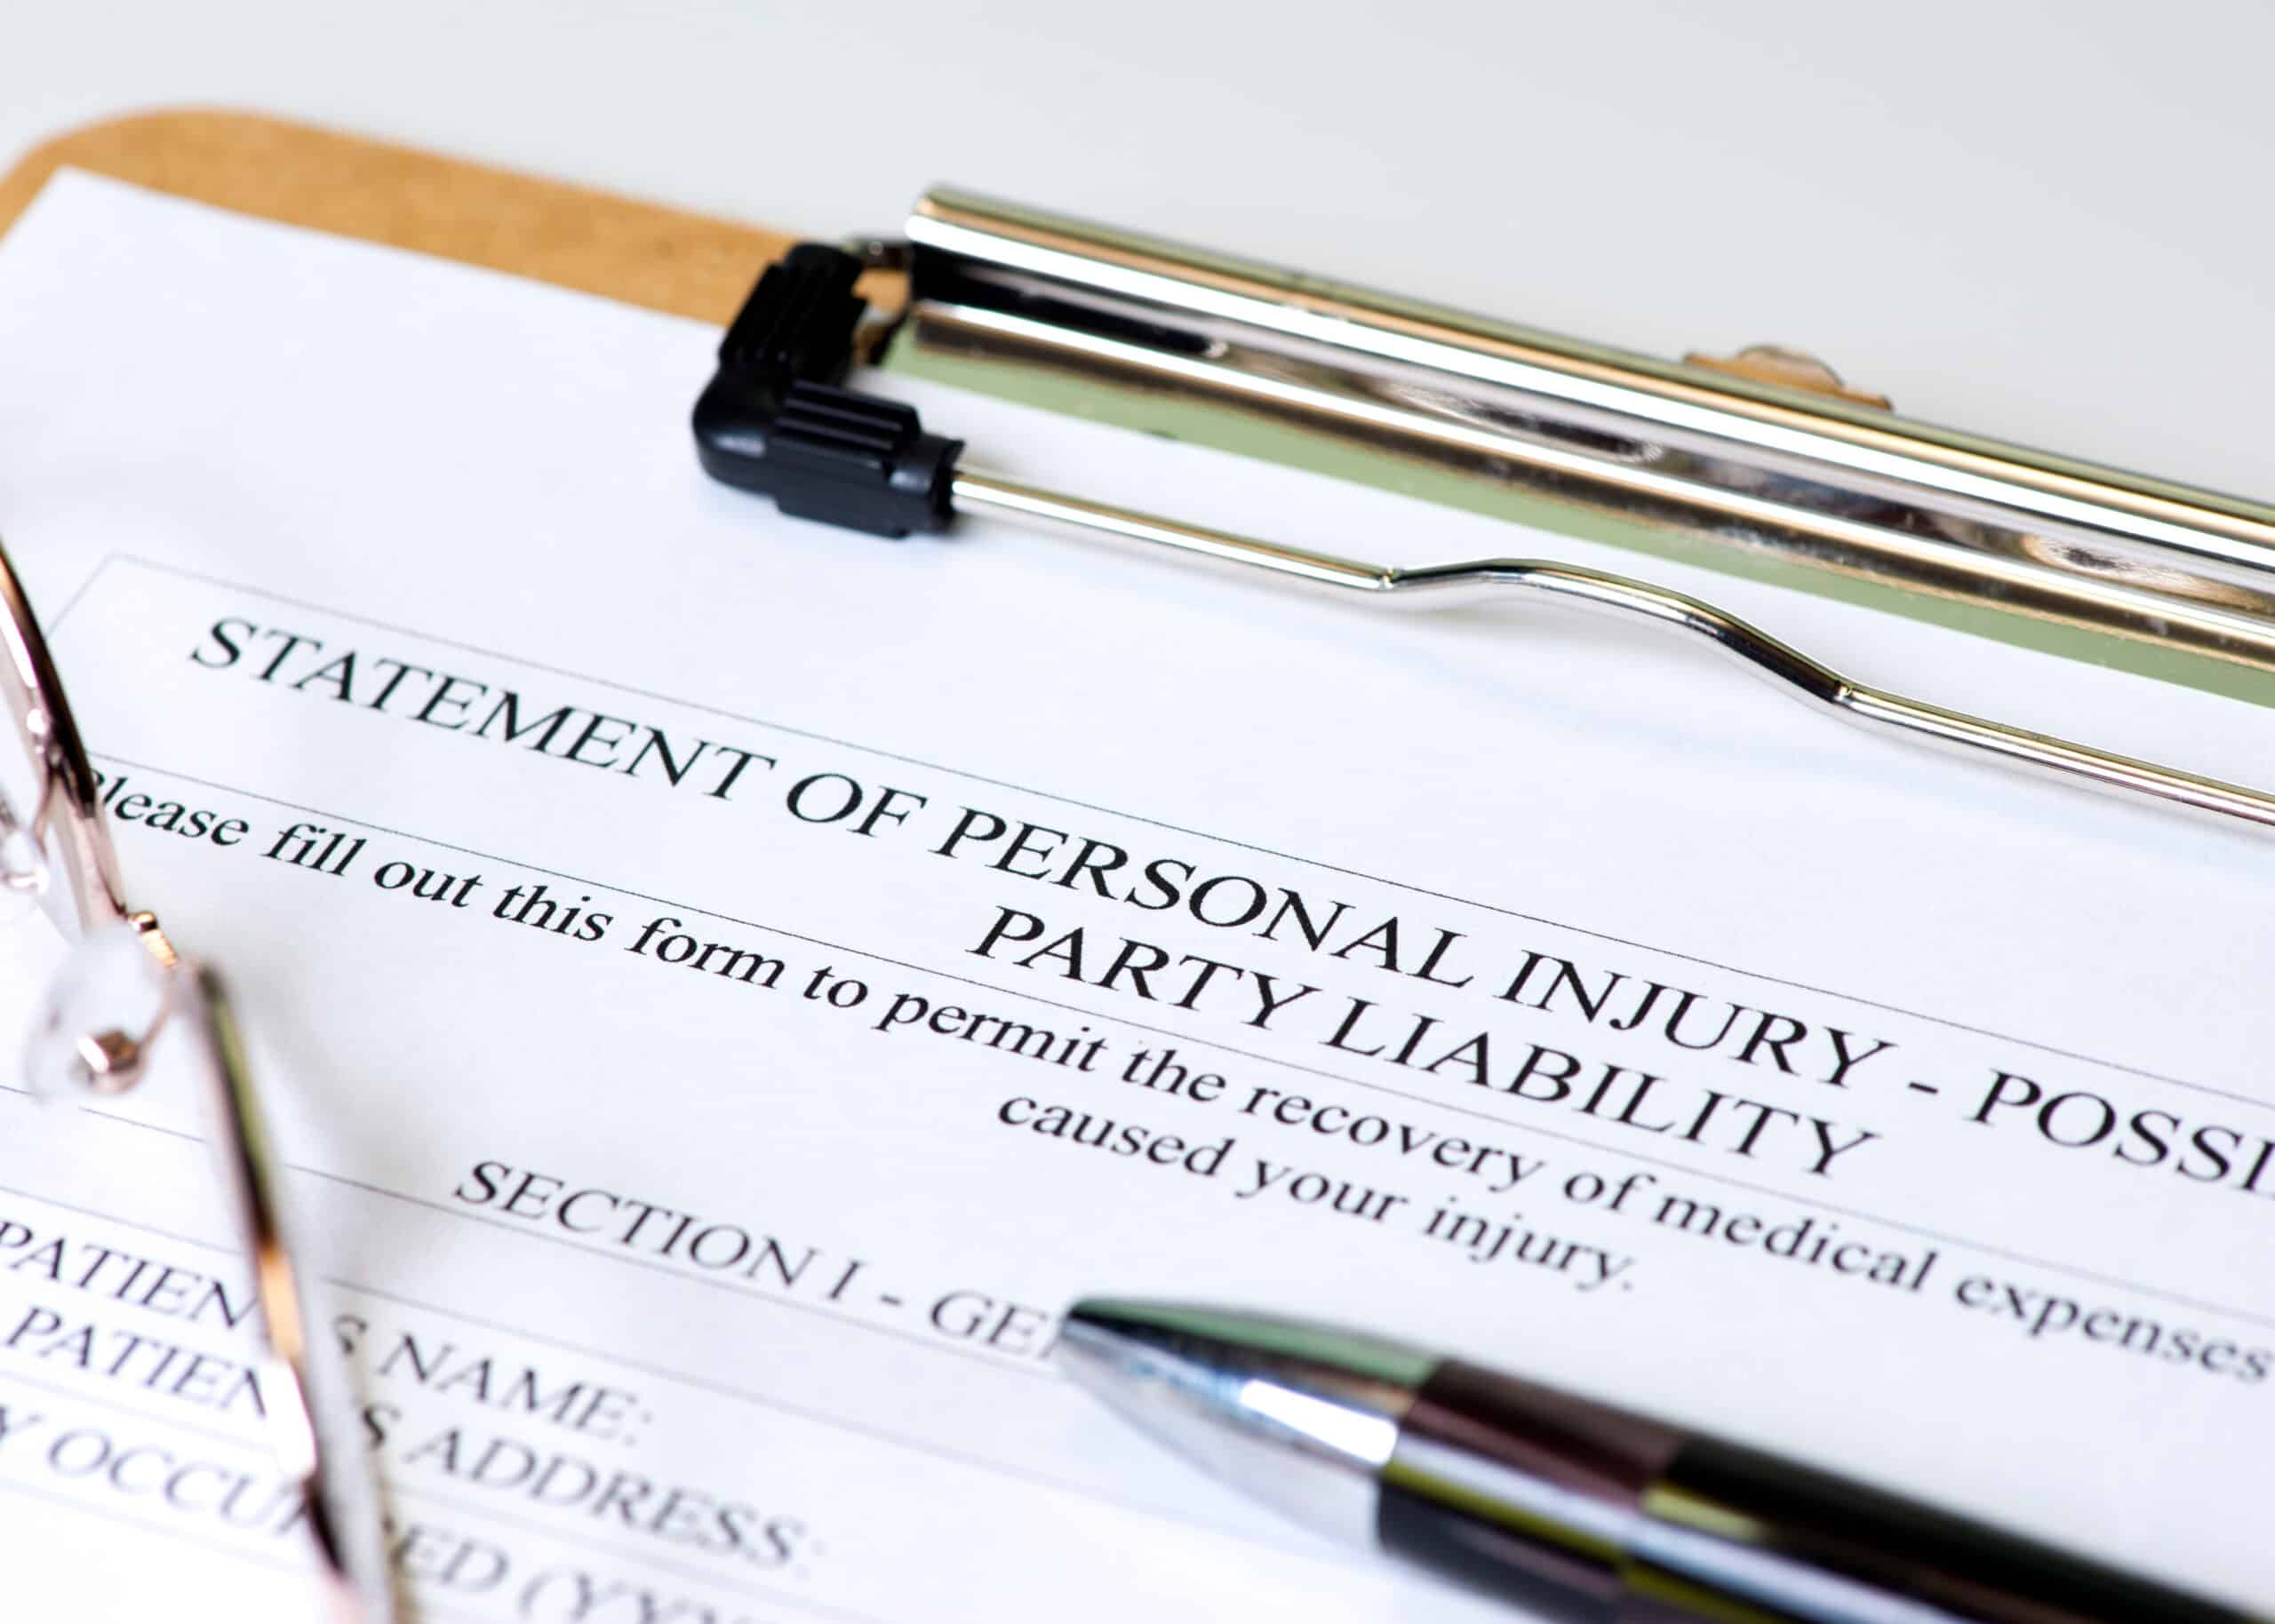 How to File a Personal Injury Claim Without a Lawyer